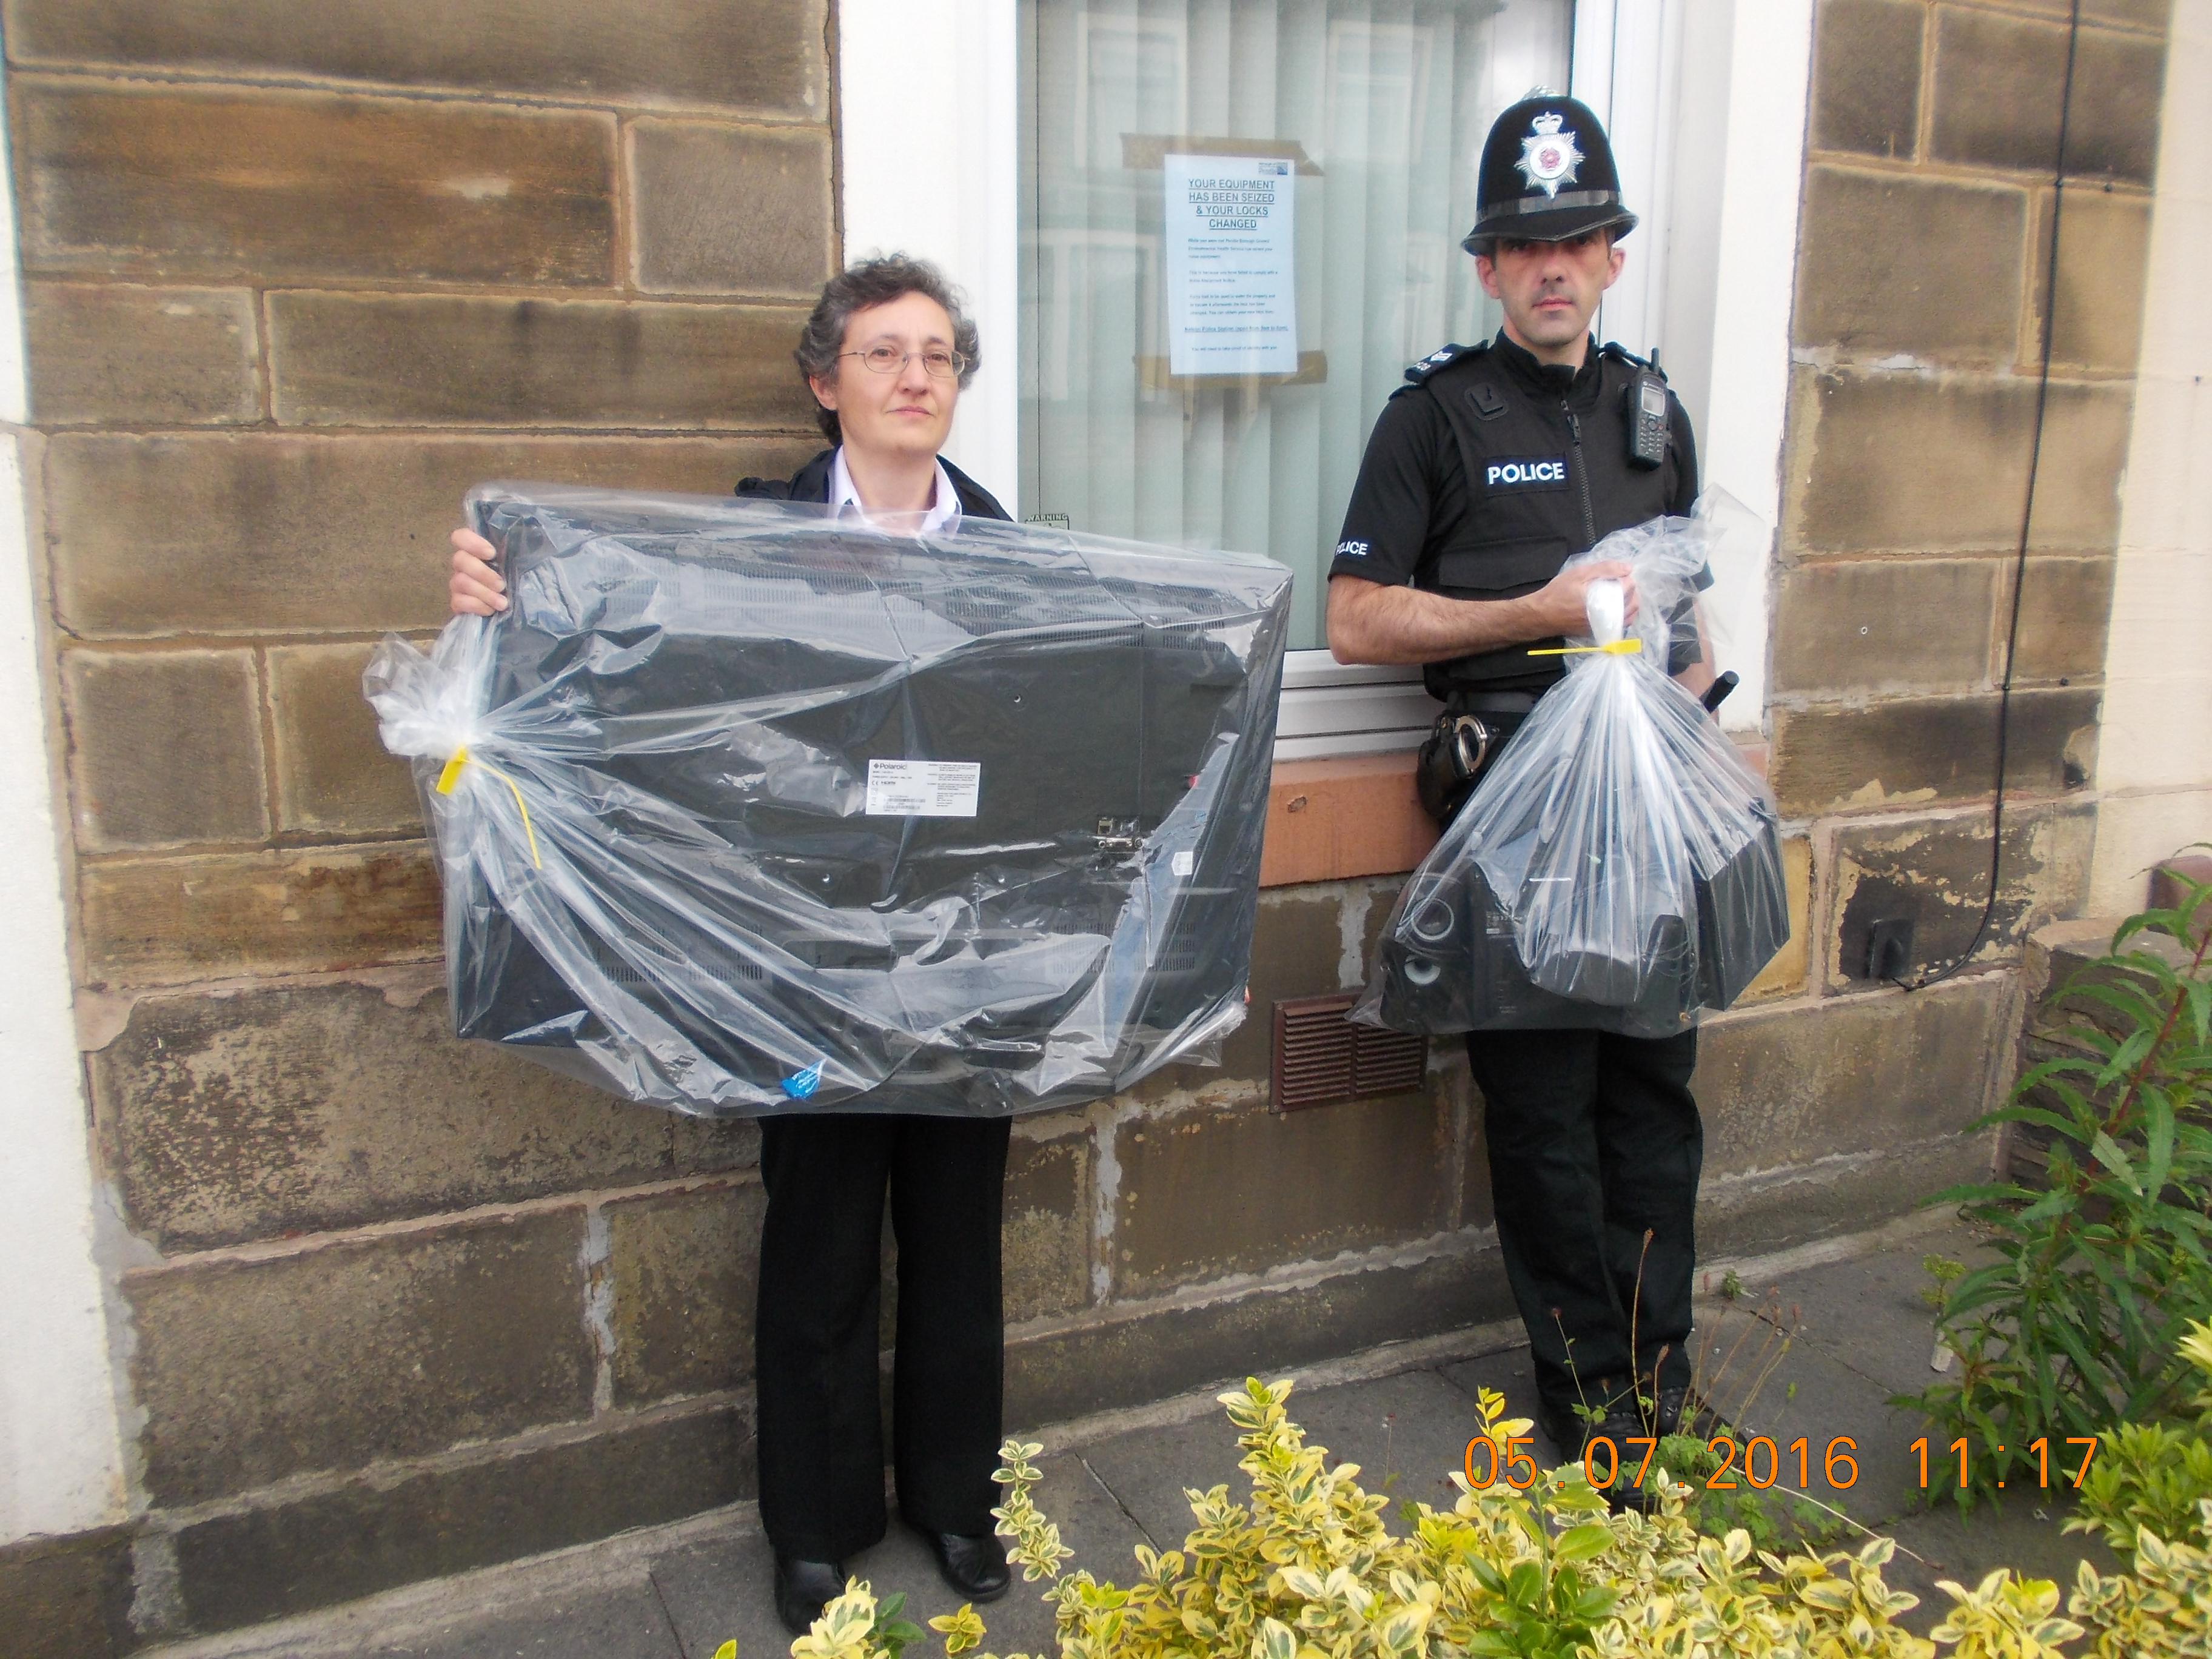 Equipment seized after warrant granted